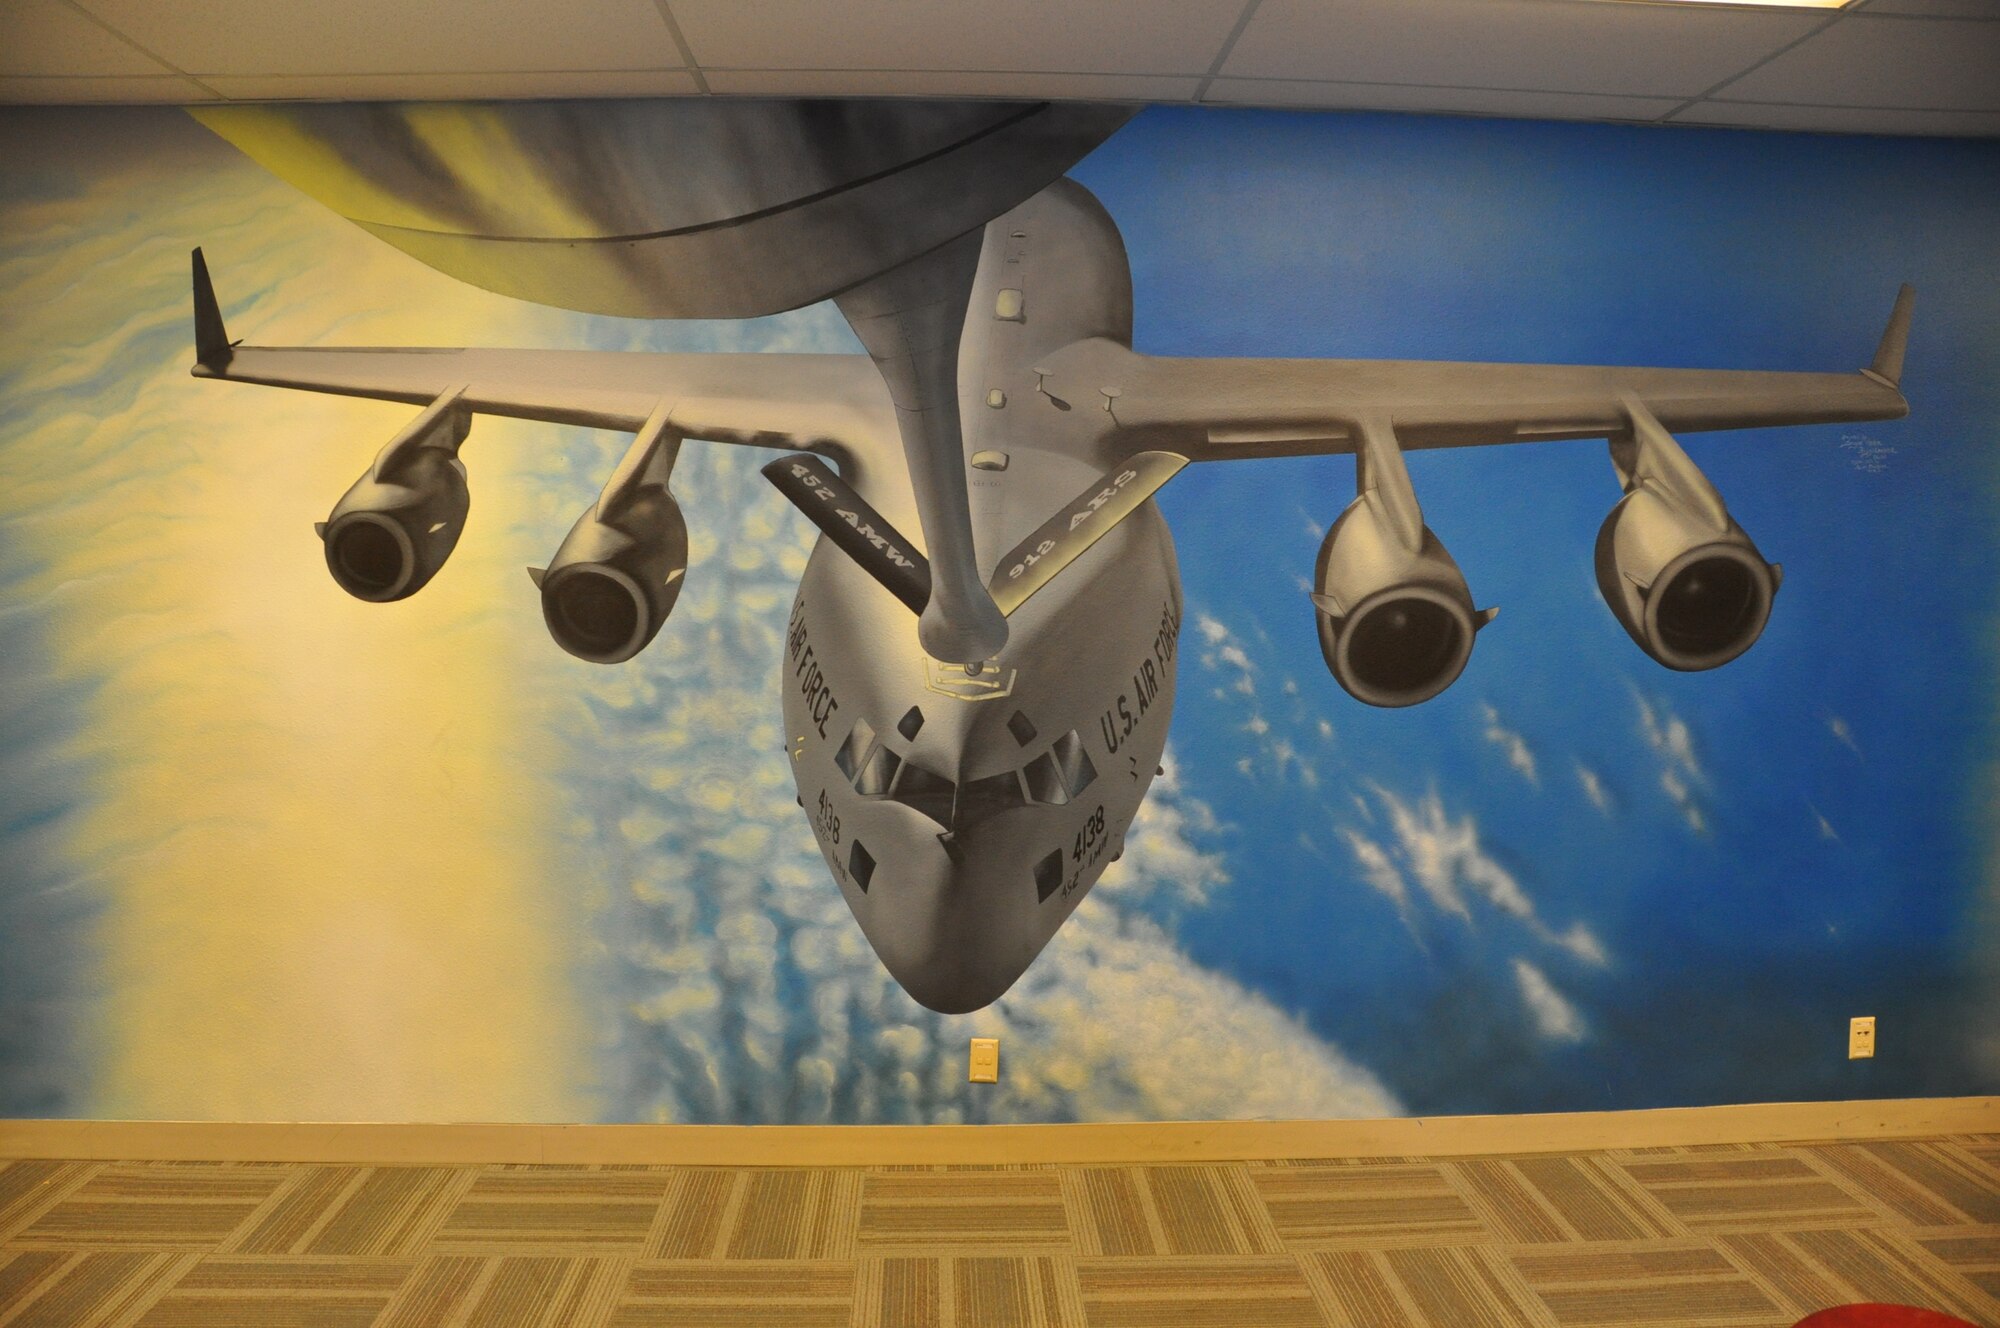 March Field’s 729th Airlift Squadron has C-17 pilots, loadmasters and now at least one honorary 'wallmaster.' Retired Master Sgt. Shayne Meder has officially outdone herself by completing a 9-by-18-foot mural which beautifully depicts an aerial refueling between a 452nd Air Mobility Wing C-17 and KC-135.